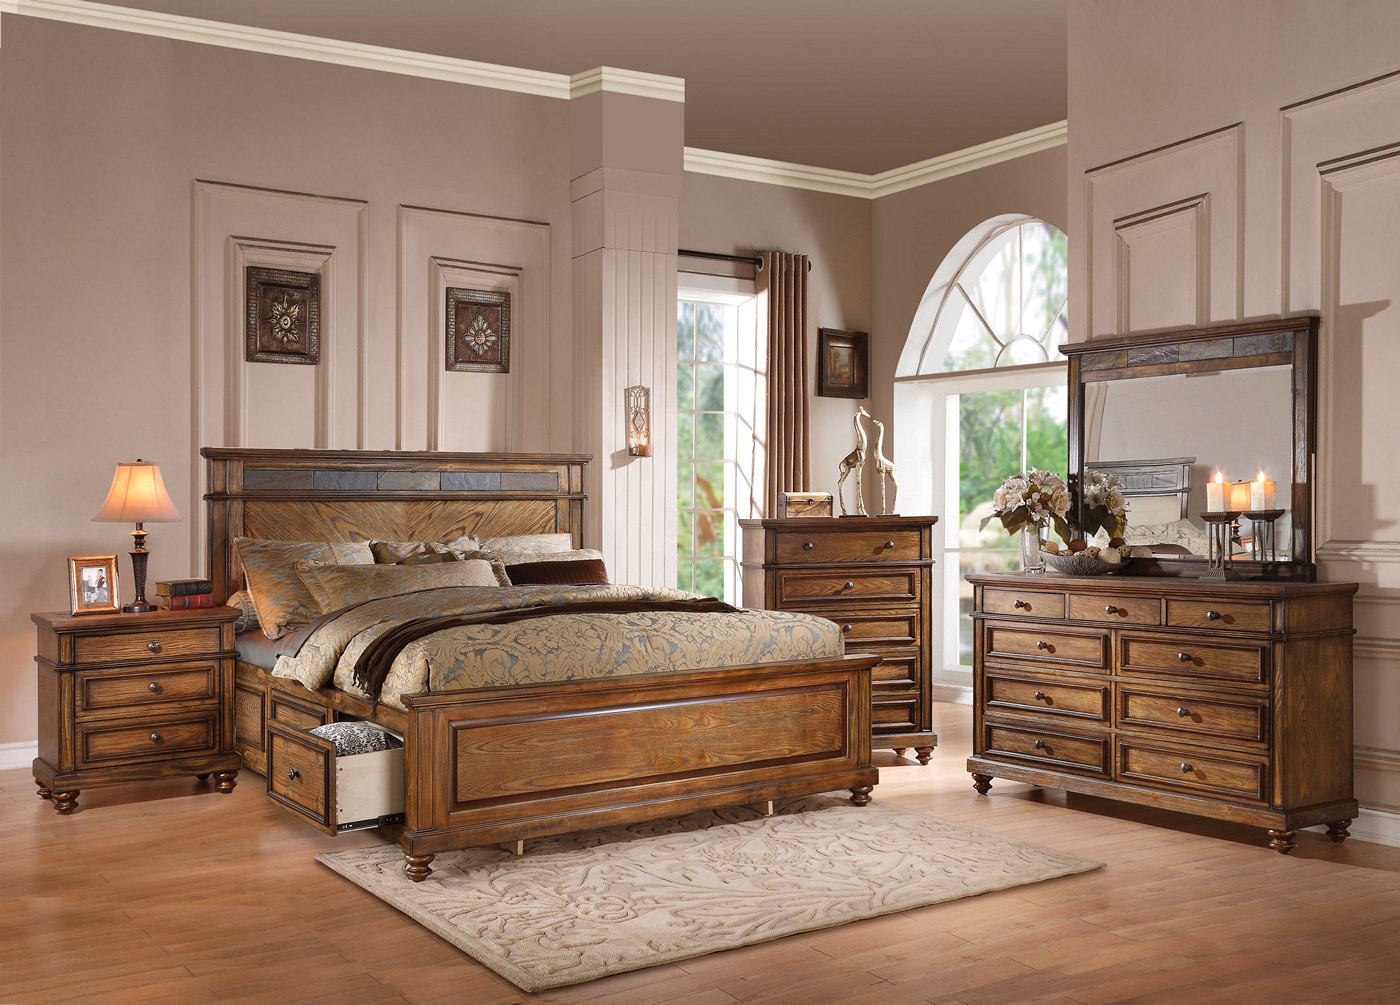 Rustic Bedroom Set King
 Abilene Rustic 4 pc King Storage Bed Set with Stone Accent